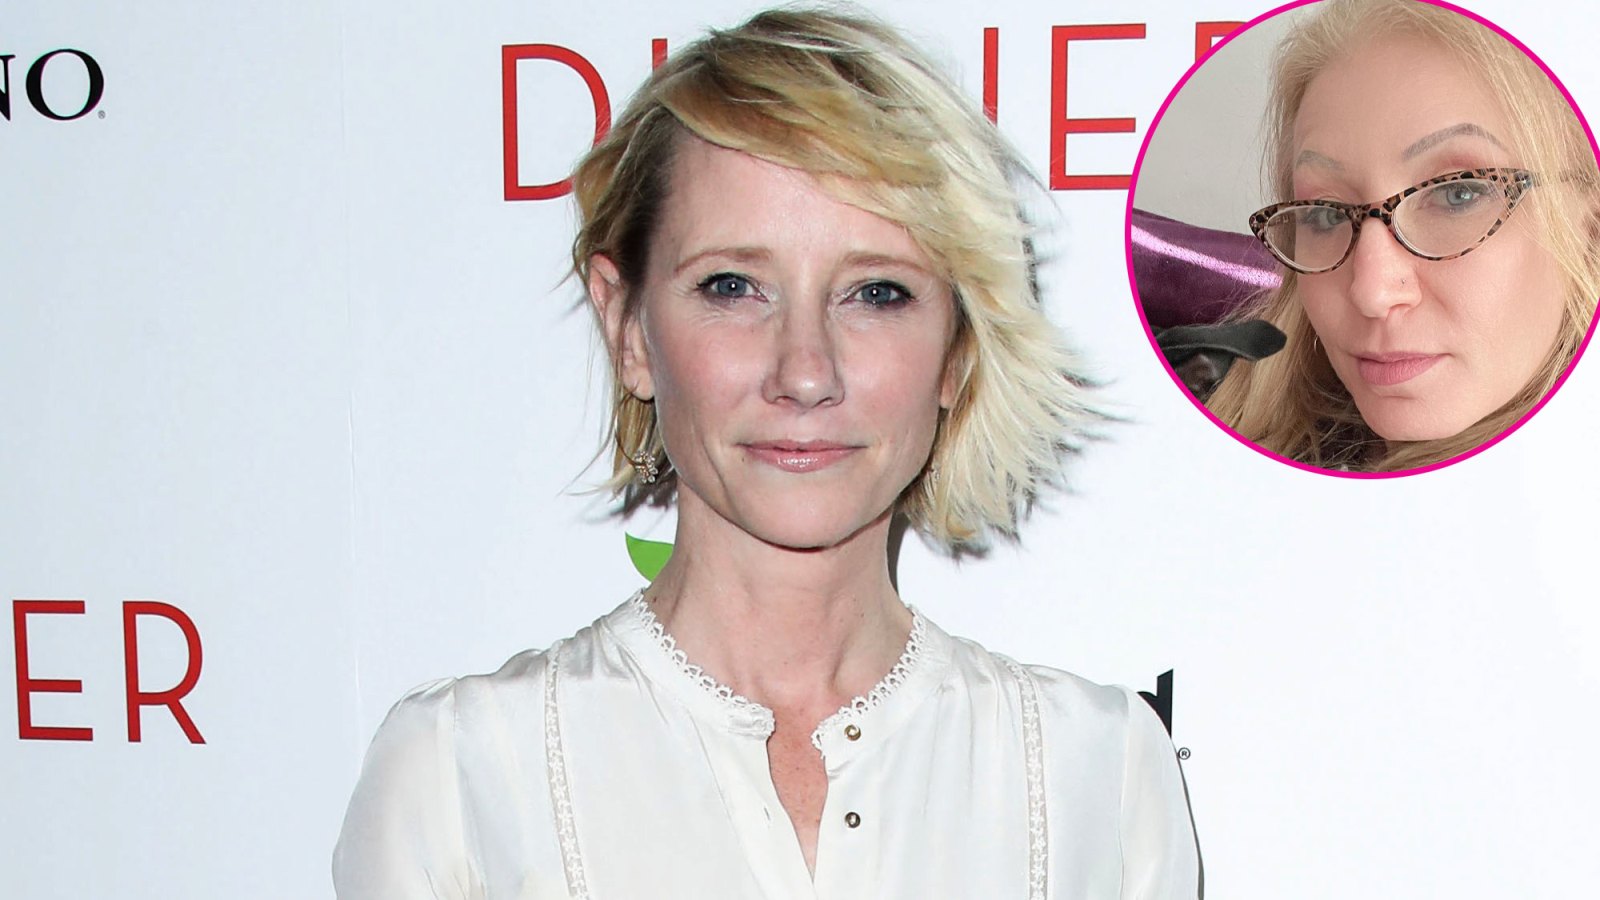 Resident of House in Anne Heche Crash Reacts to Star's Death